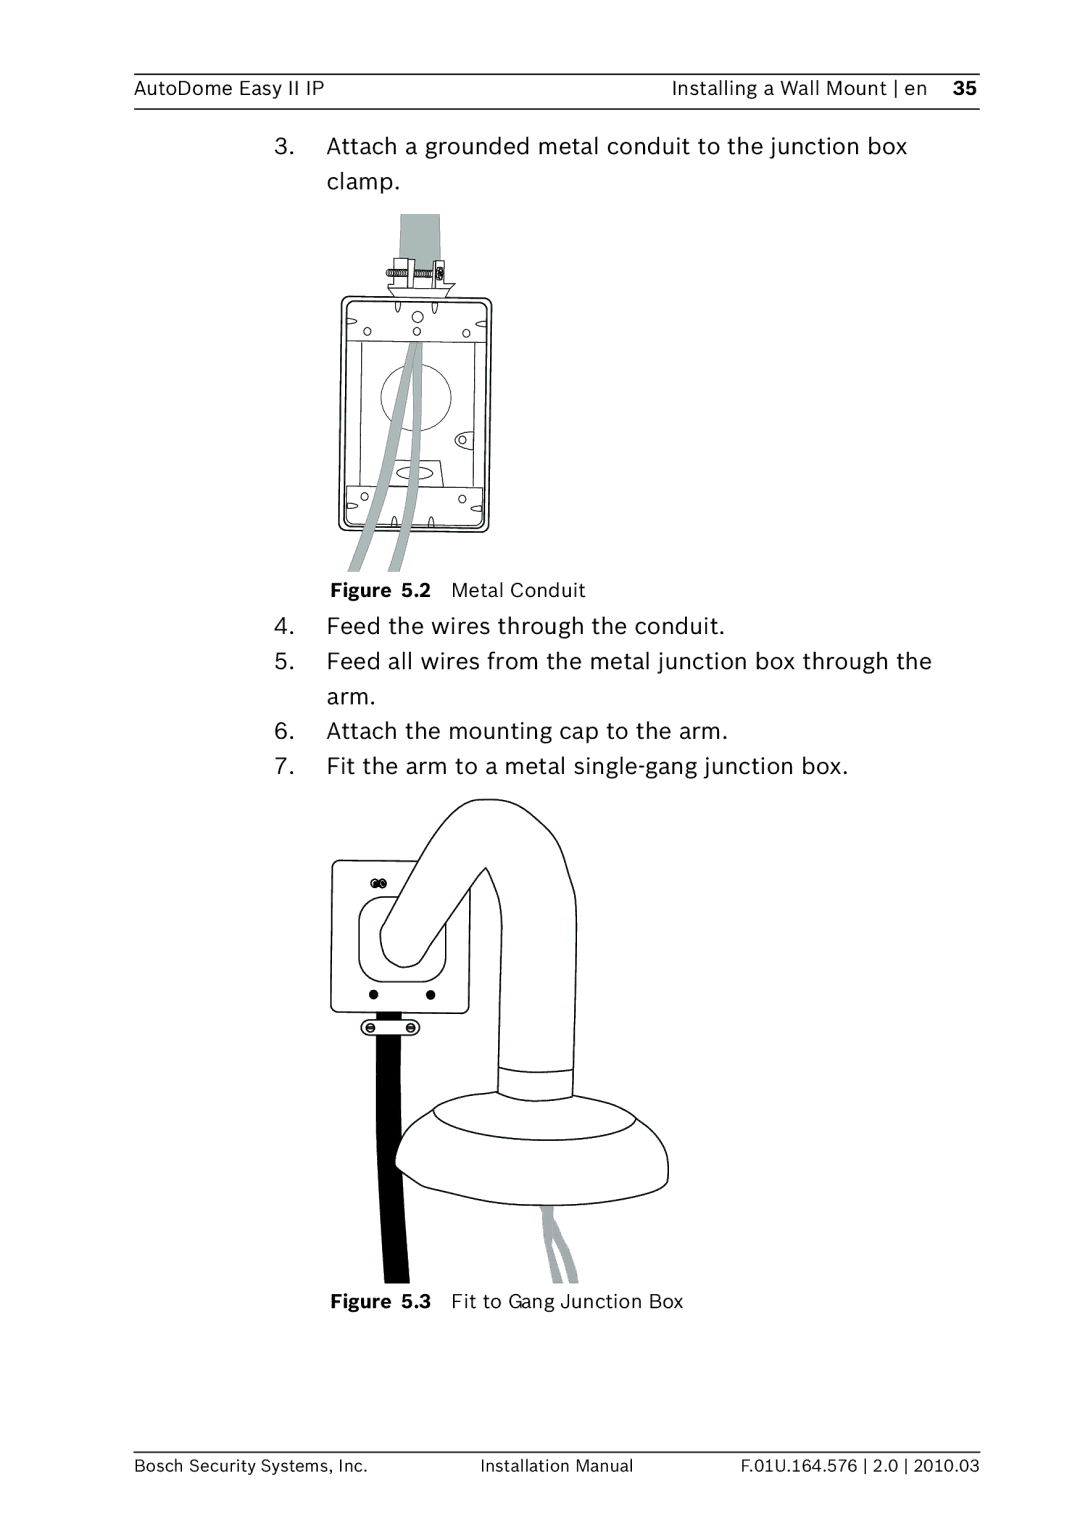 Bosch Appliances VEZ installation manual Attach a grounded metal conduit to the junction box clamp, Metal Conduit 